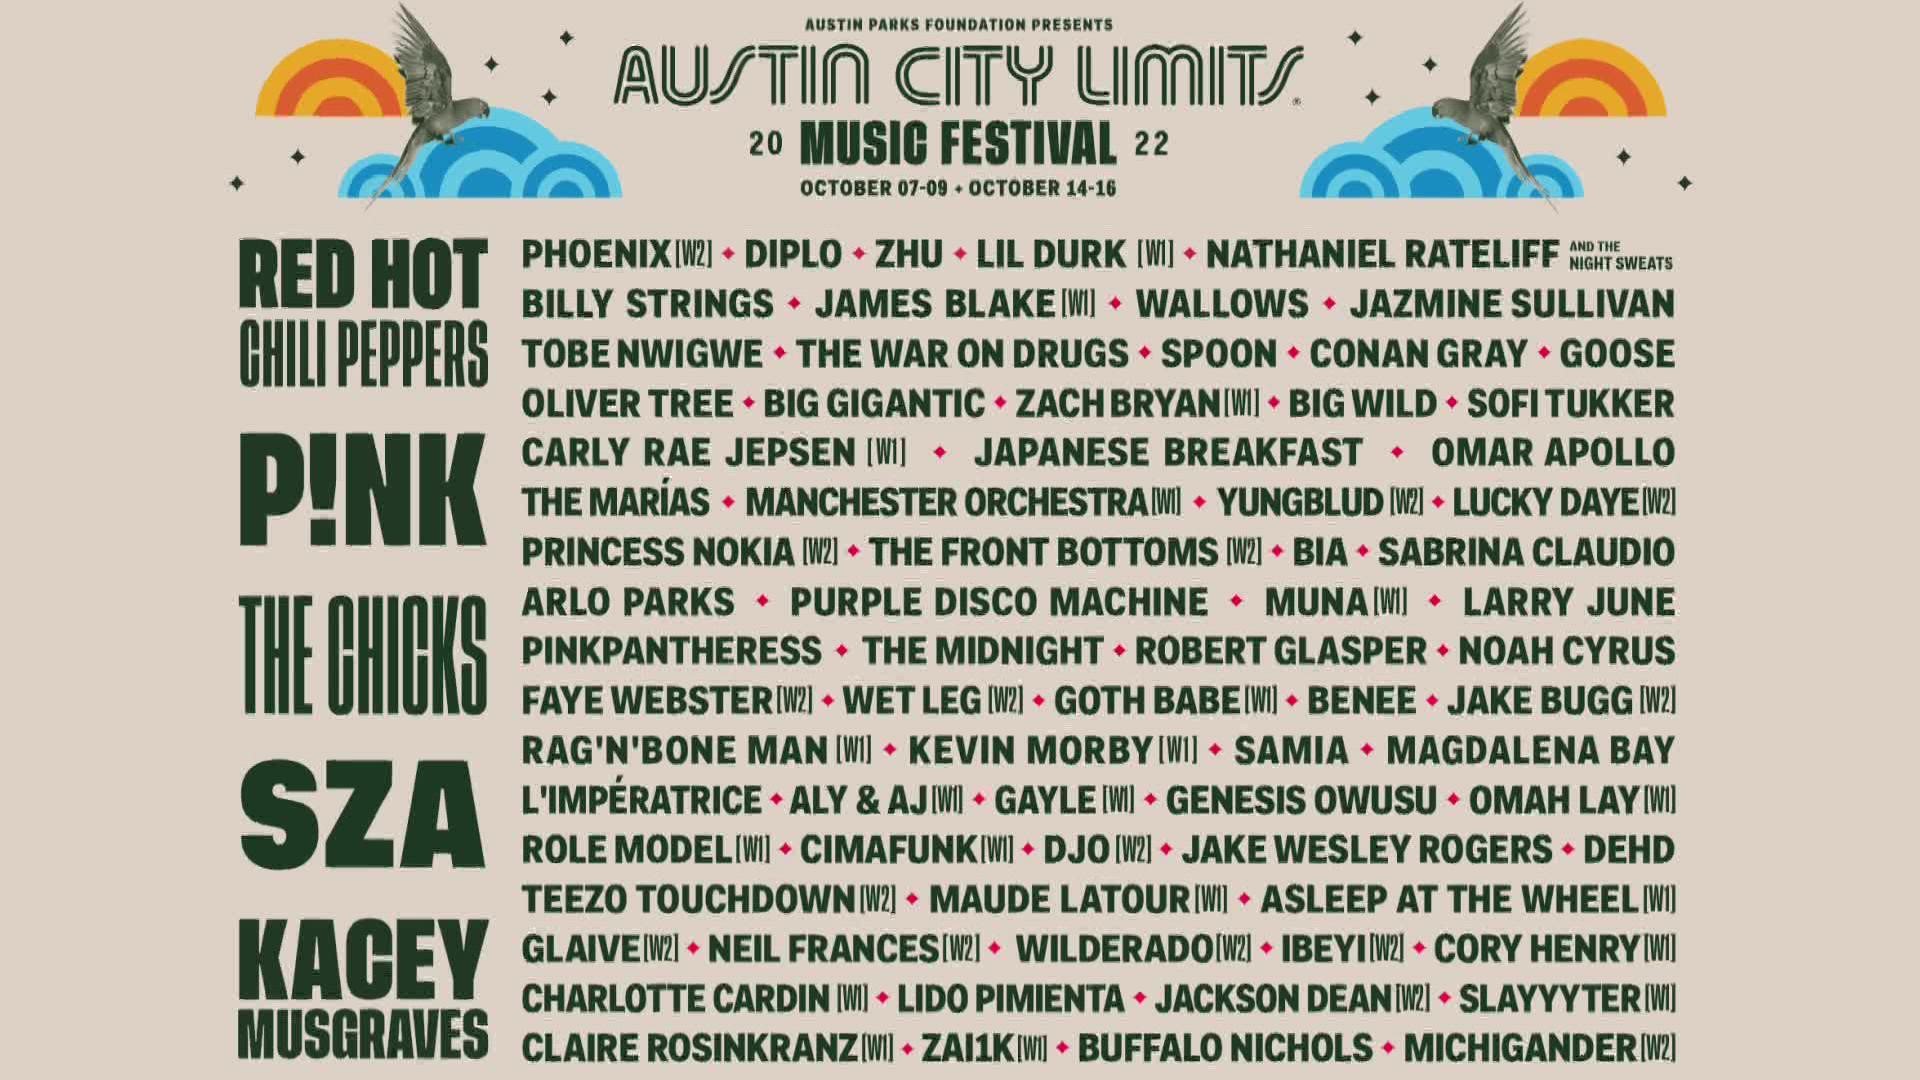 Are you ready, fest-goers? The lineup for the 2022 Austin City Limits Music Festival is out now, and Arlington is also holding a festival.